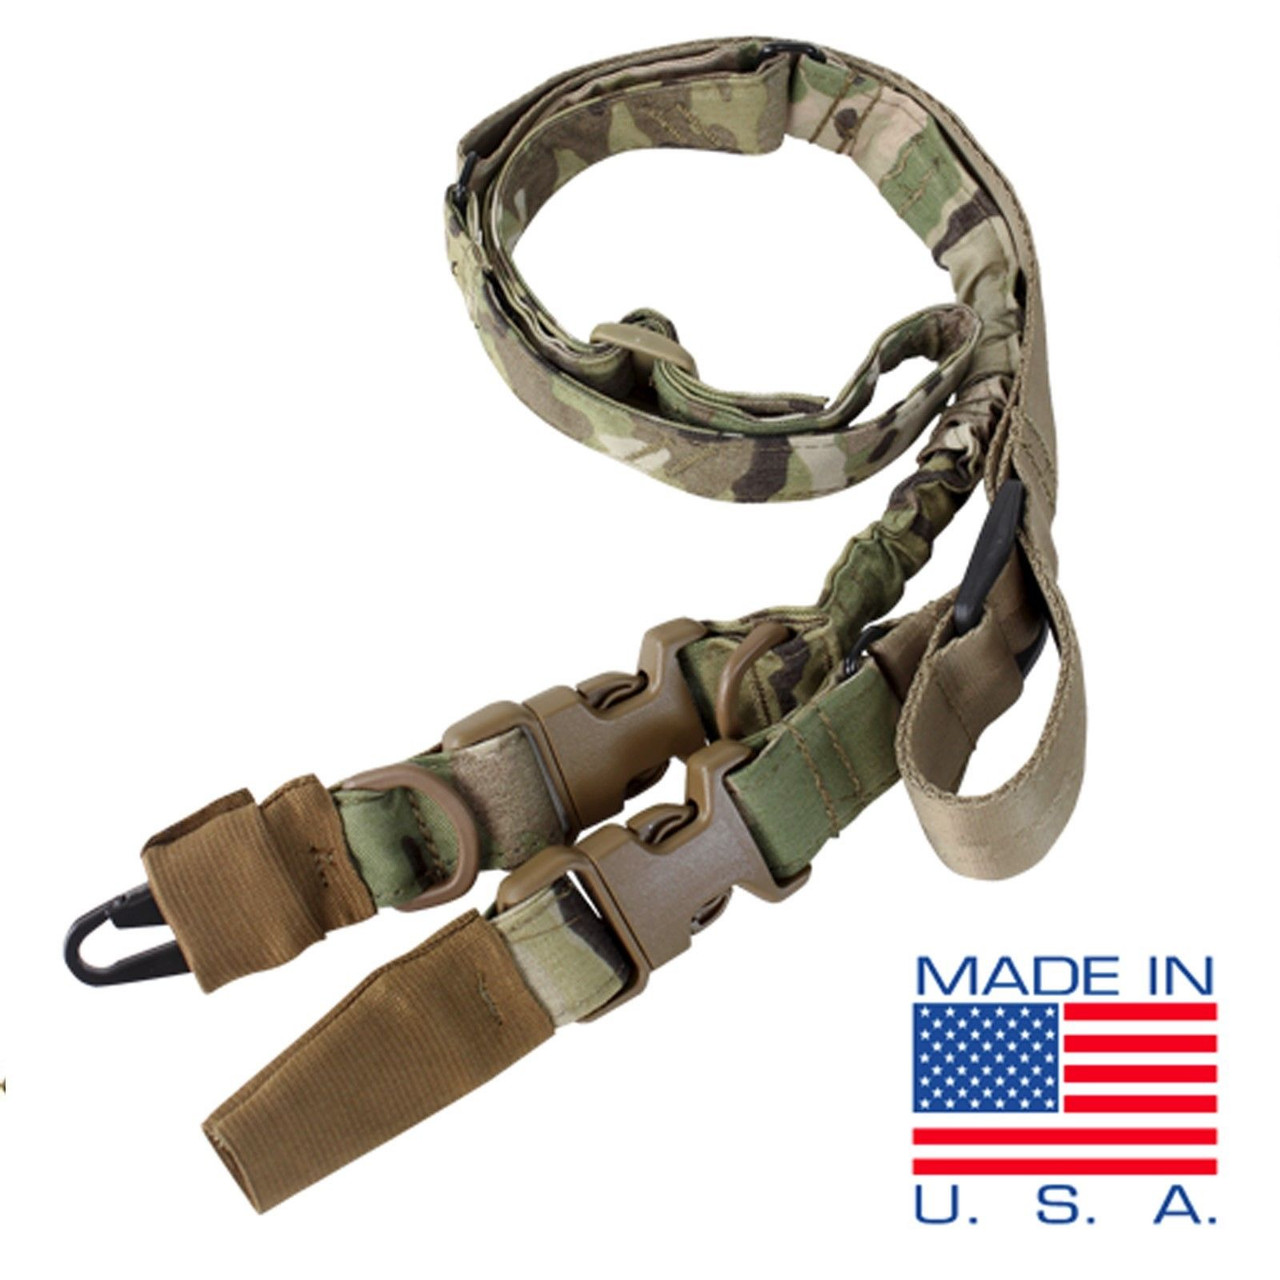 MULTI-CAM CBT Tactical 2 Point Bungee Rifle Sling Shoulder Strap Made in USA